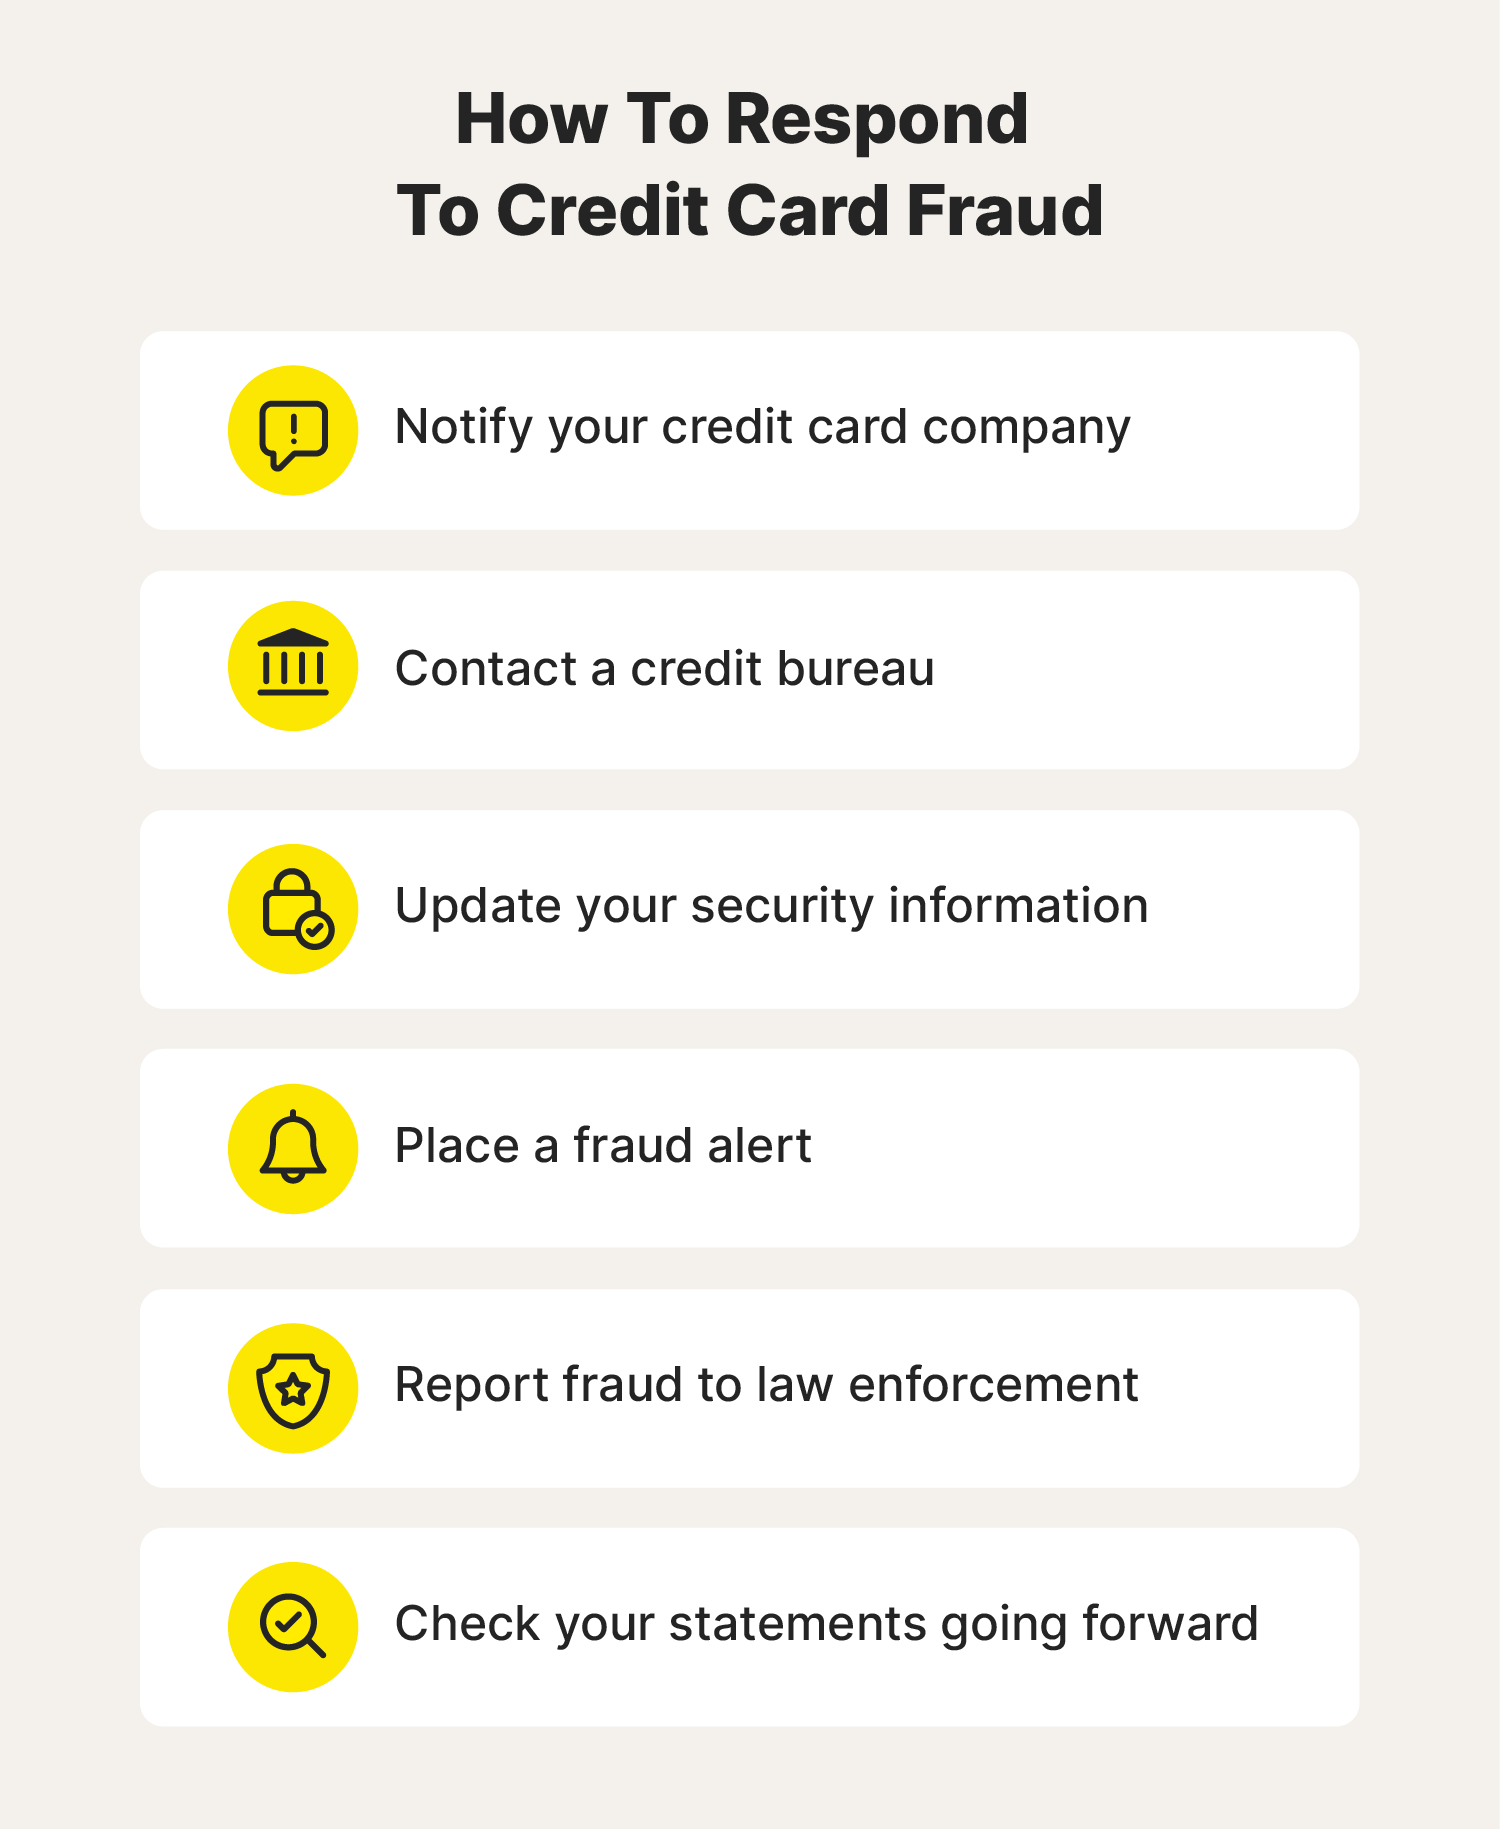 An image listing tips on how to respond to credit card fraud. 